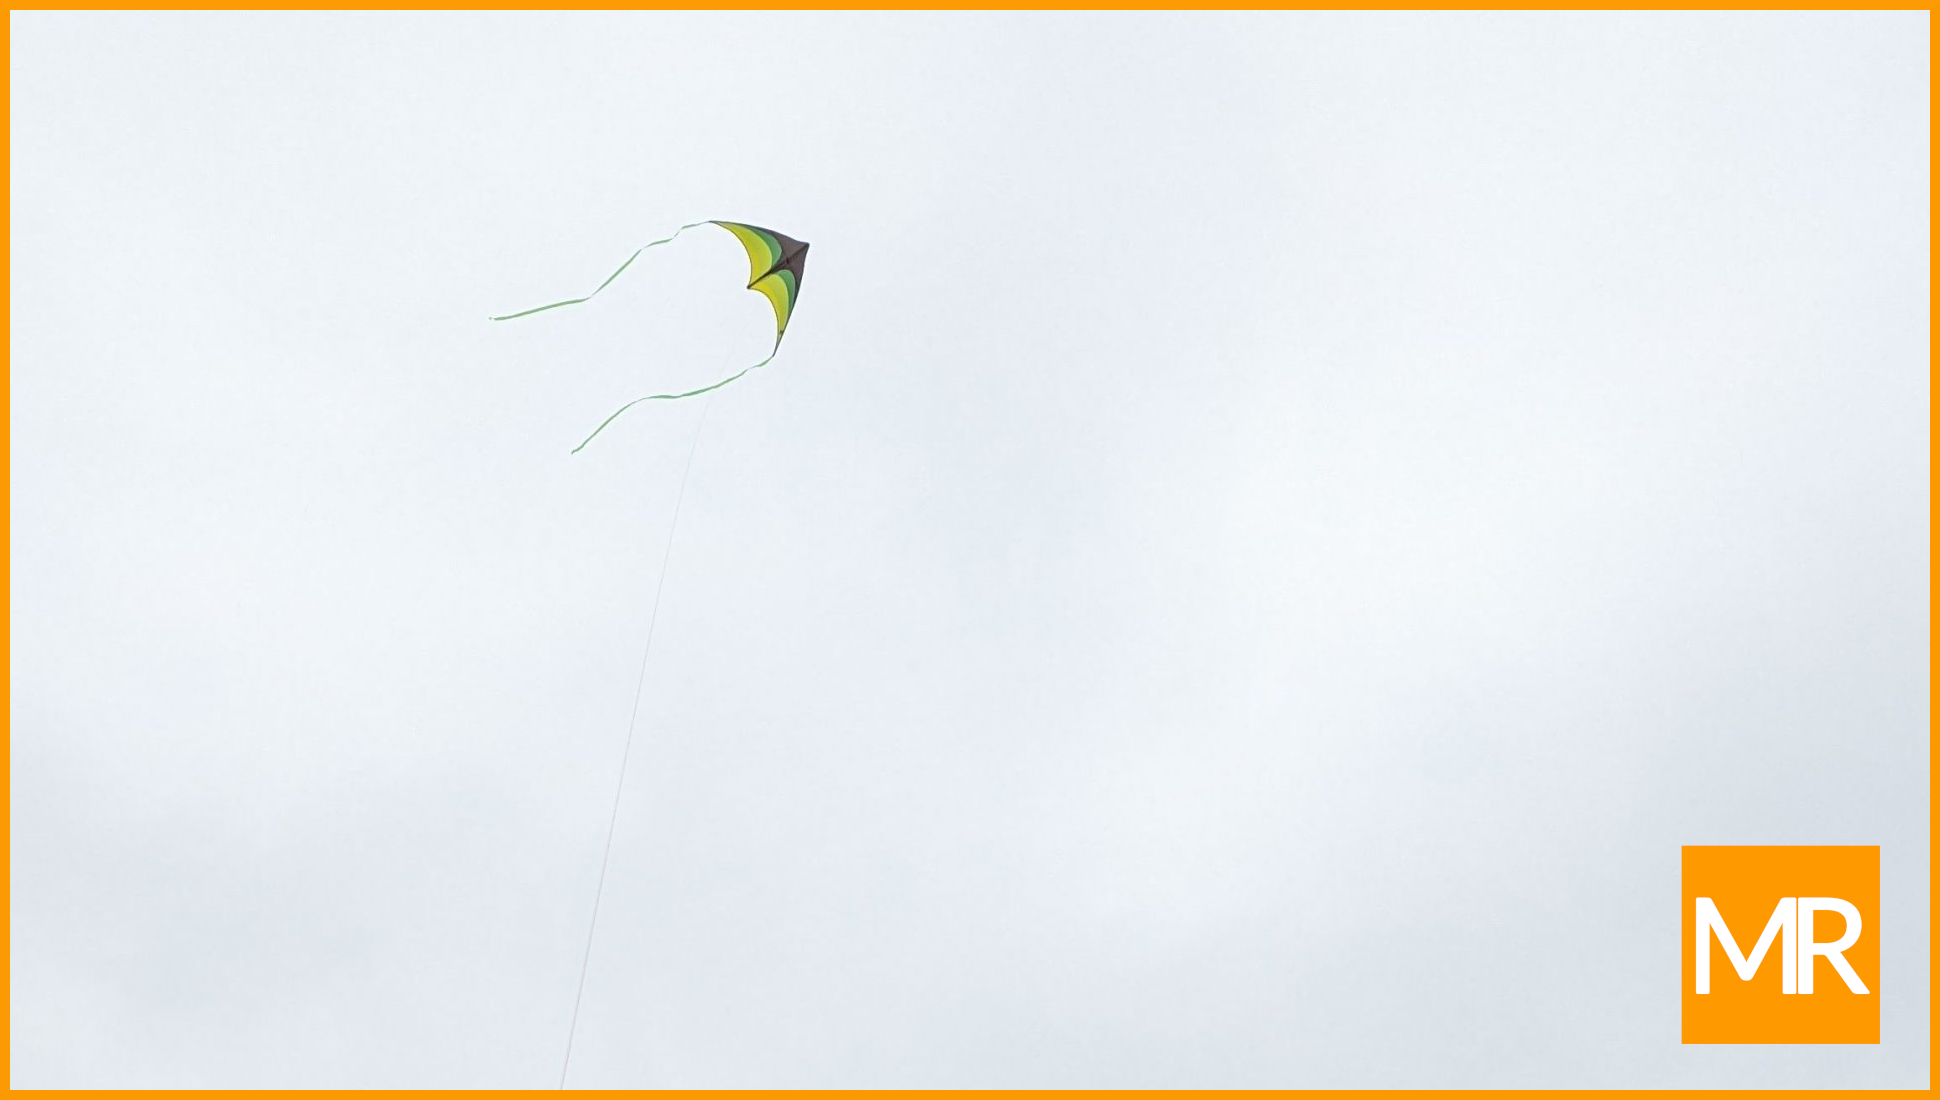 Are toy kites viable for elevating ham radio wire antennas?